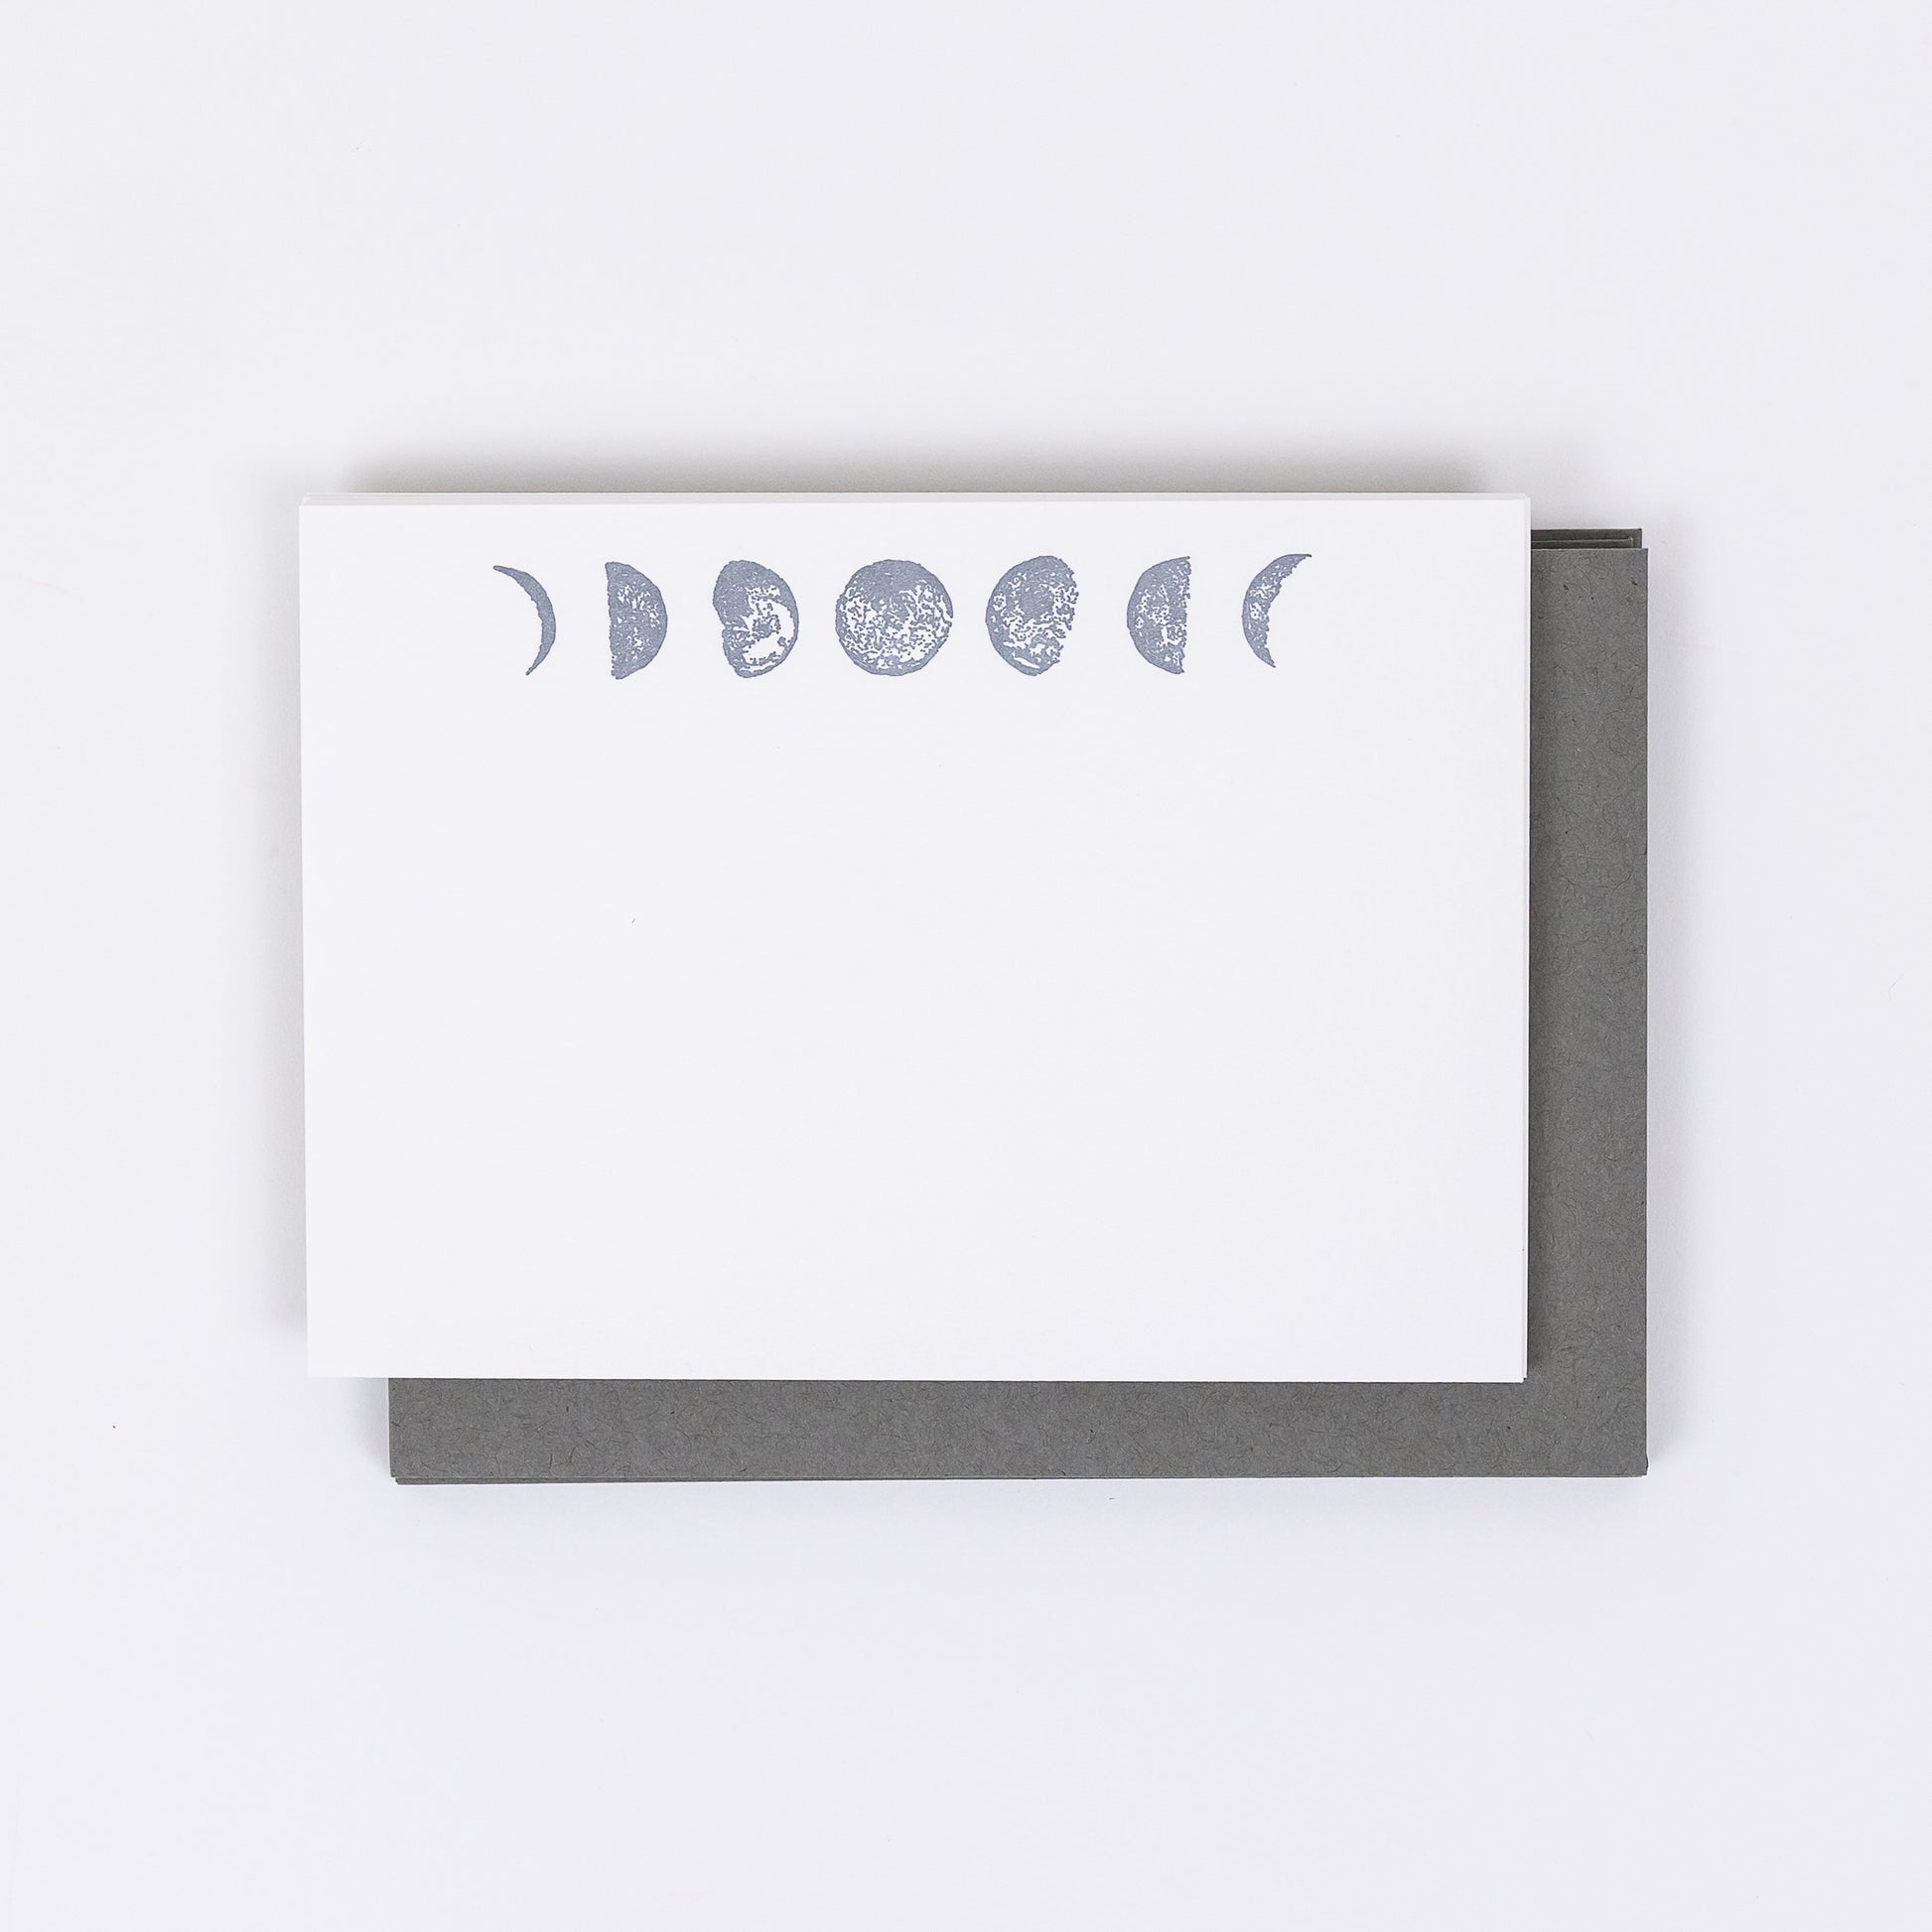 Set of 10 Letterpress Note Cards featuring hand-drawn Moon Phases letterpress printed in a shimmery silver ink onto 100% cotton paper. Includes 10 rich grey envelopes. Size A6. 